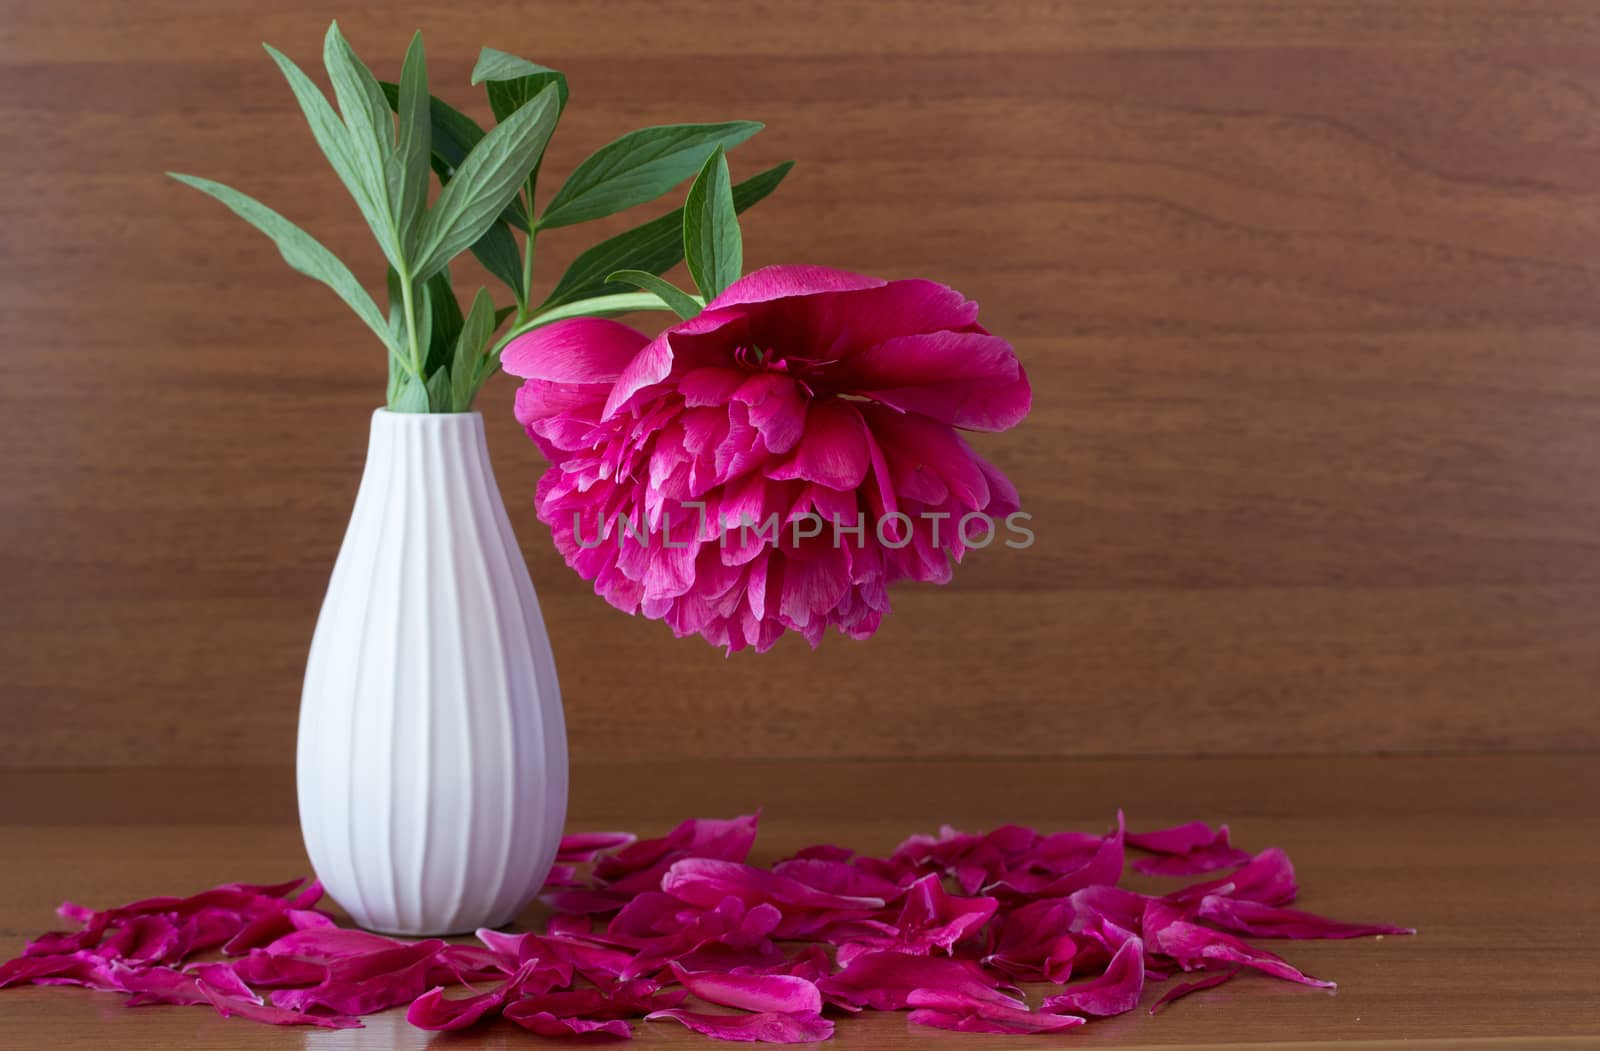 pink flowers in a vase, wooden background